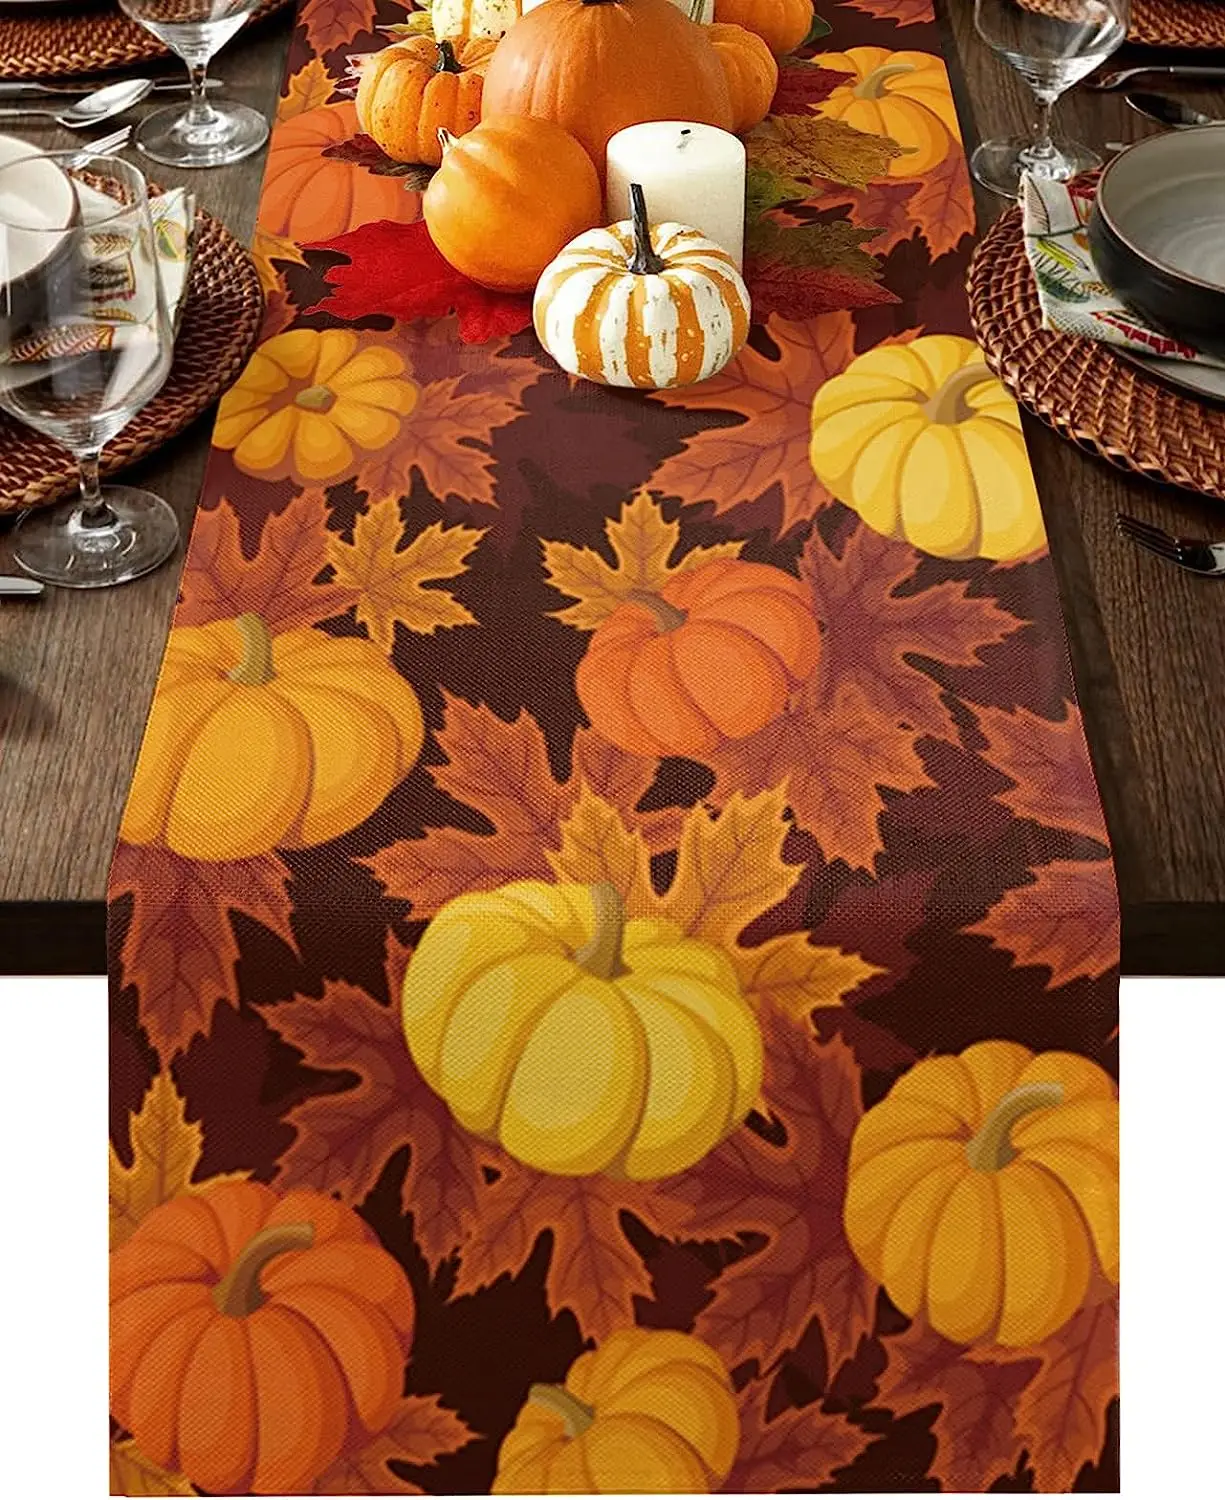 

Fall Thanksgiving Maple Leaf Pumpkin Linen Table Runner Kitchen Table Decor Farmhouse Dining Table Runners Holiday Party Decor